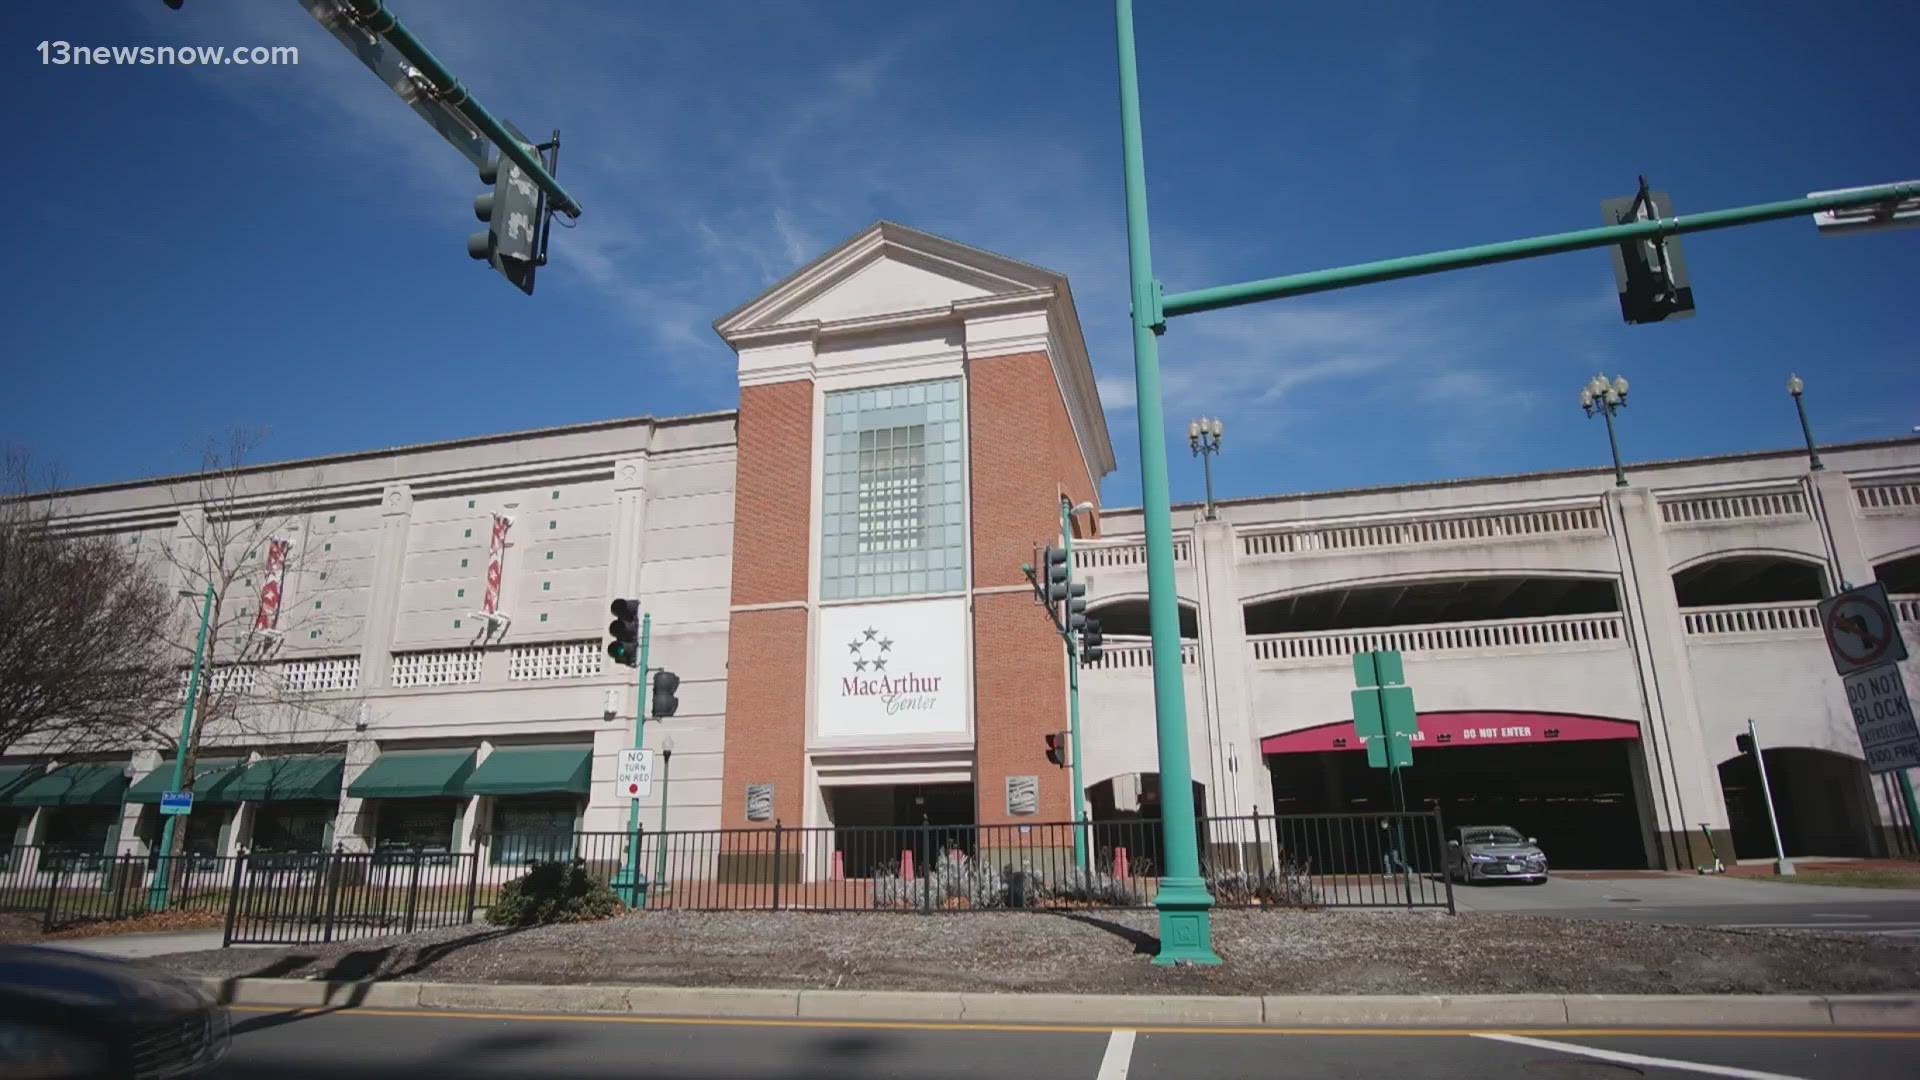 Norfolk is moving forward with its effort to buy the MacArthur Center. In the last hour, City Council voted 7-to-1 to allocate $18 million to purchase the property.